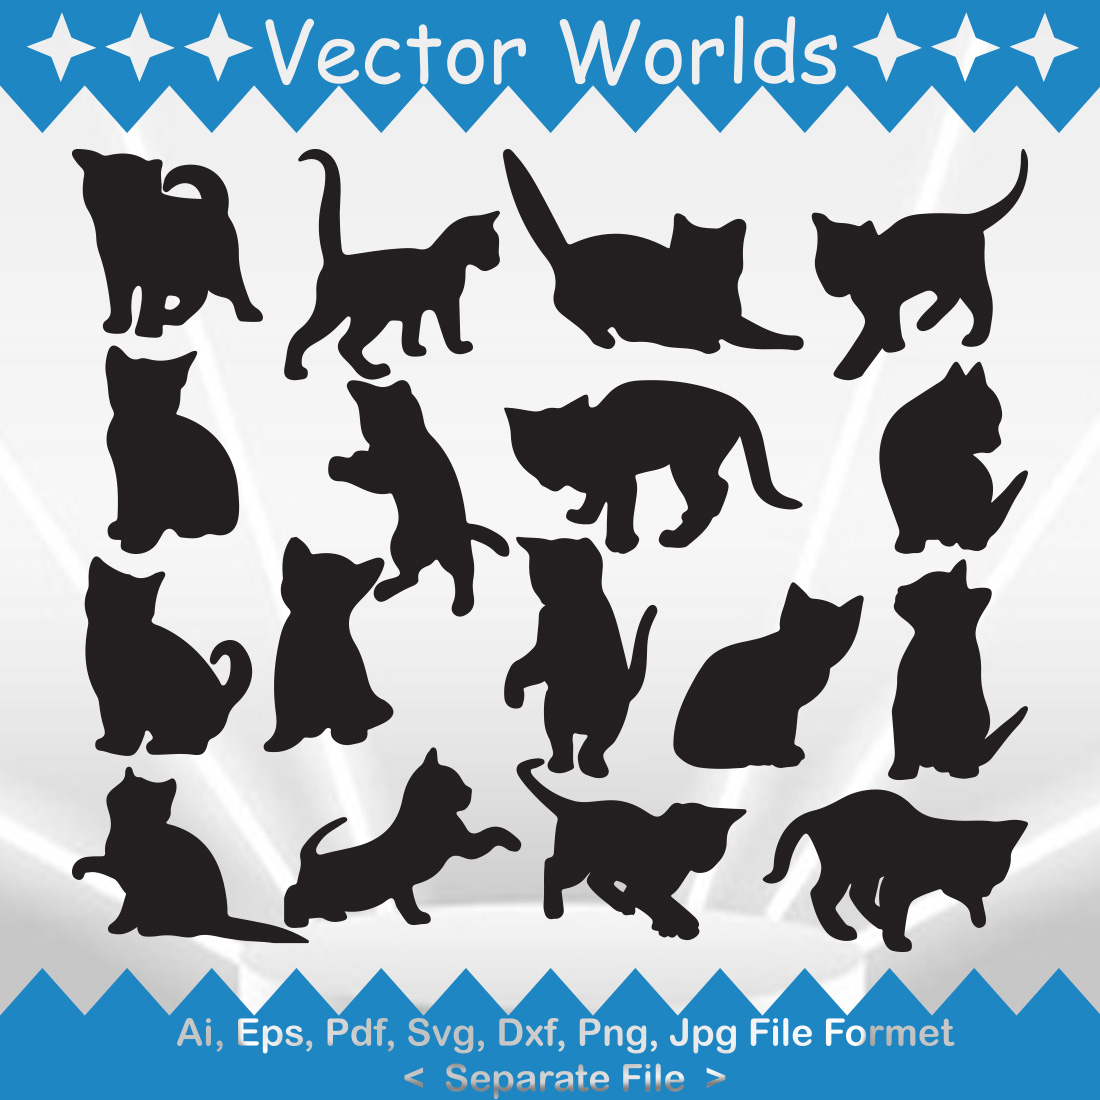 Bunch of cats silhouettes on a blue and white background.